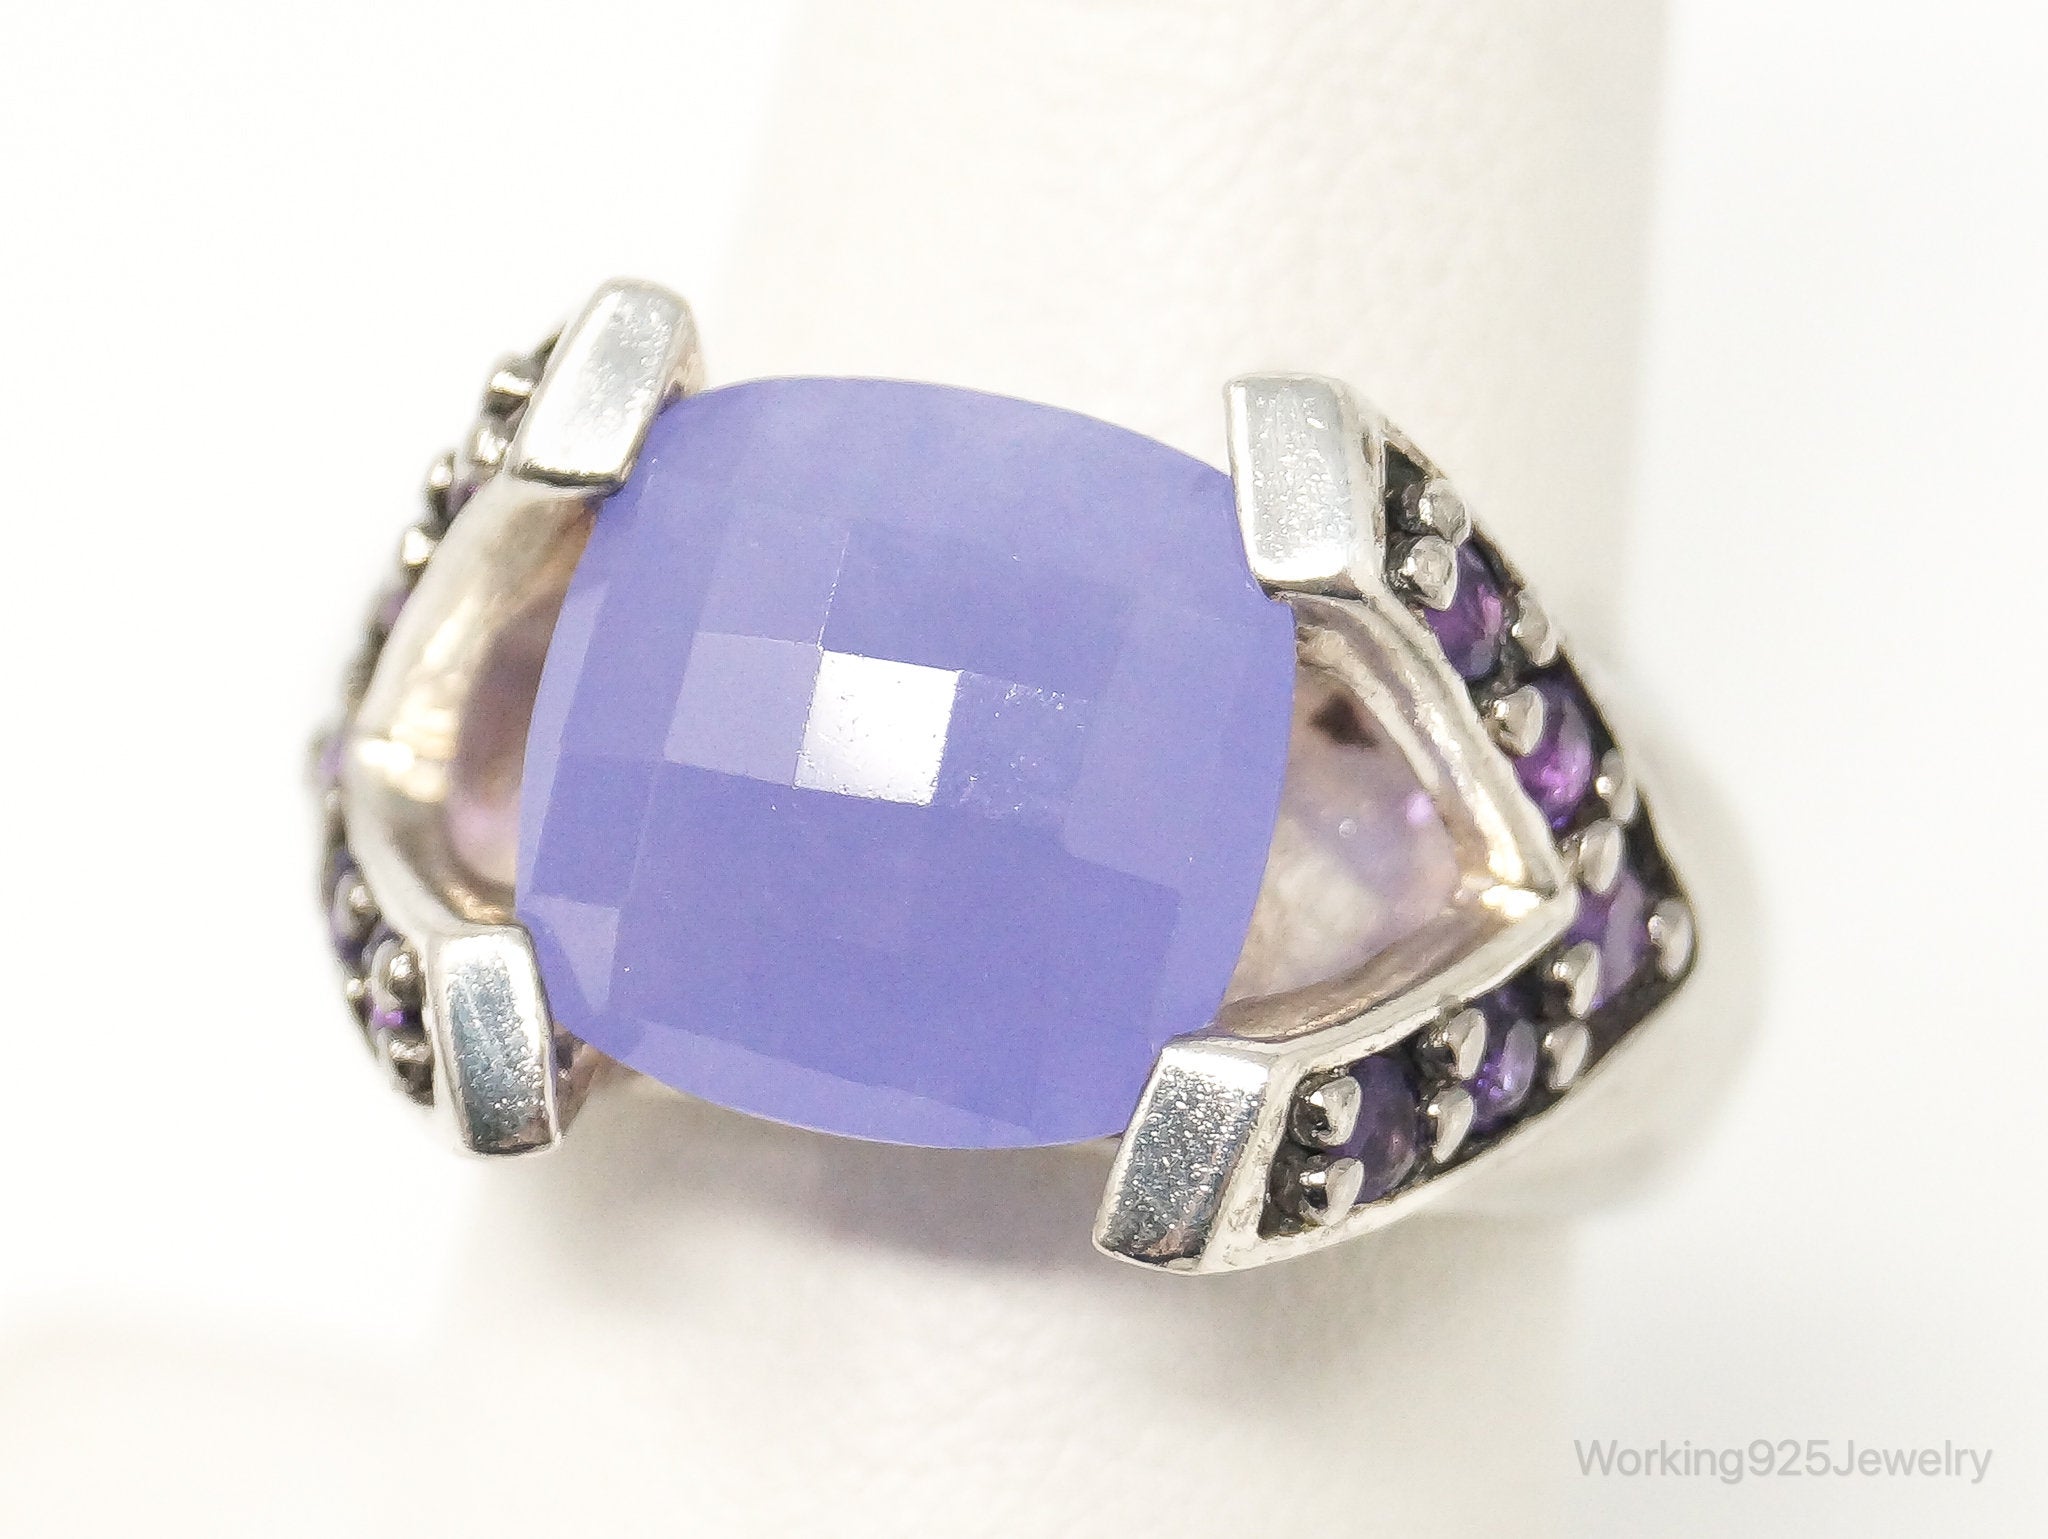 Vintage Lavender Chalcedony Amethyst Sterling Silver Ring - Size 8